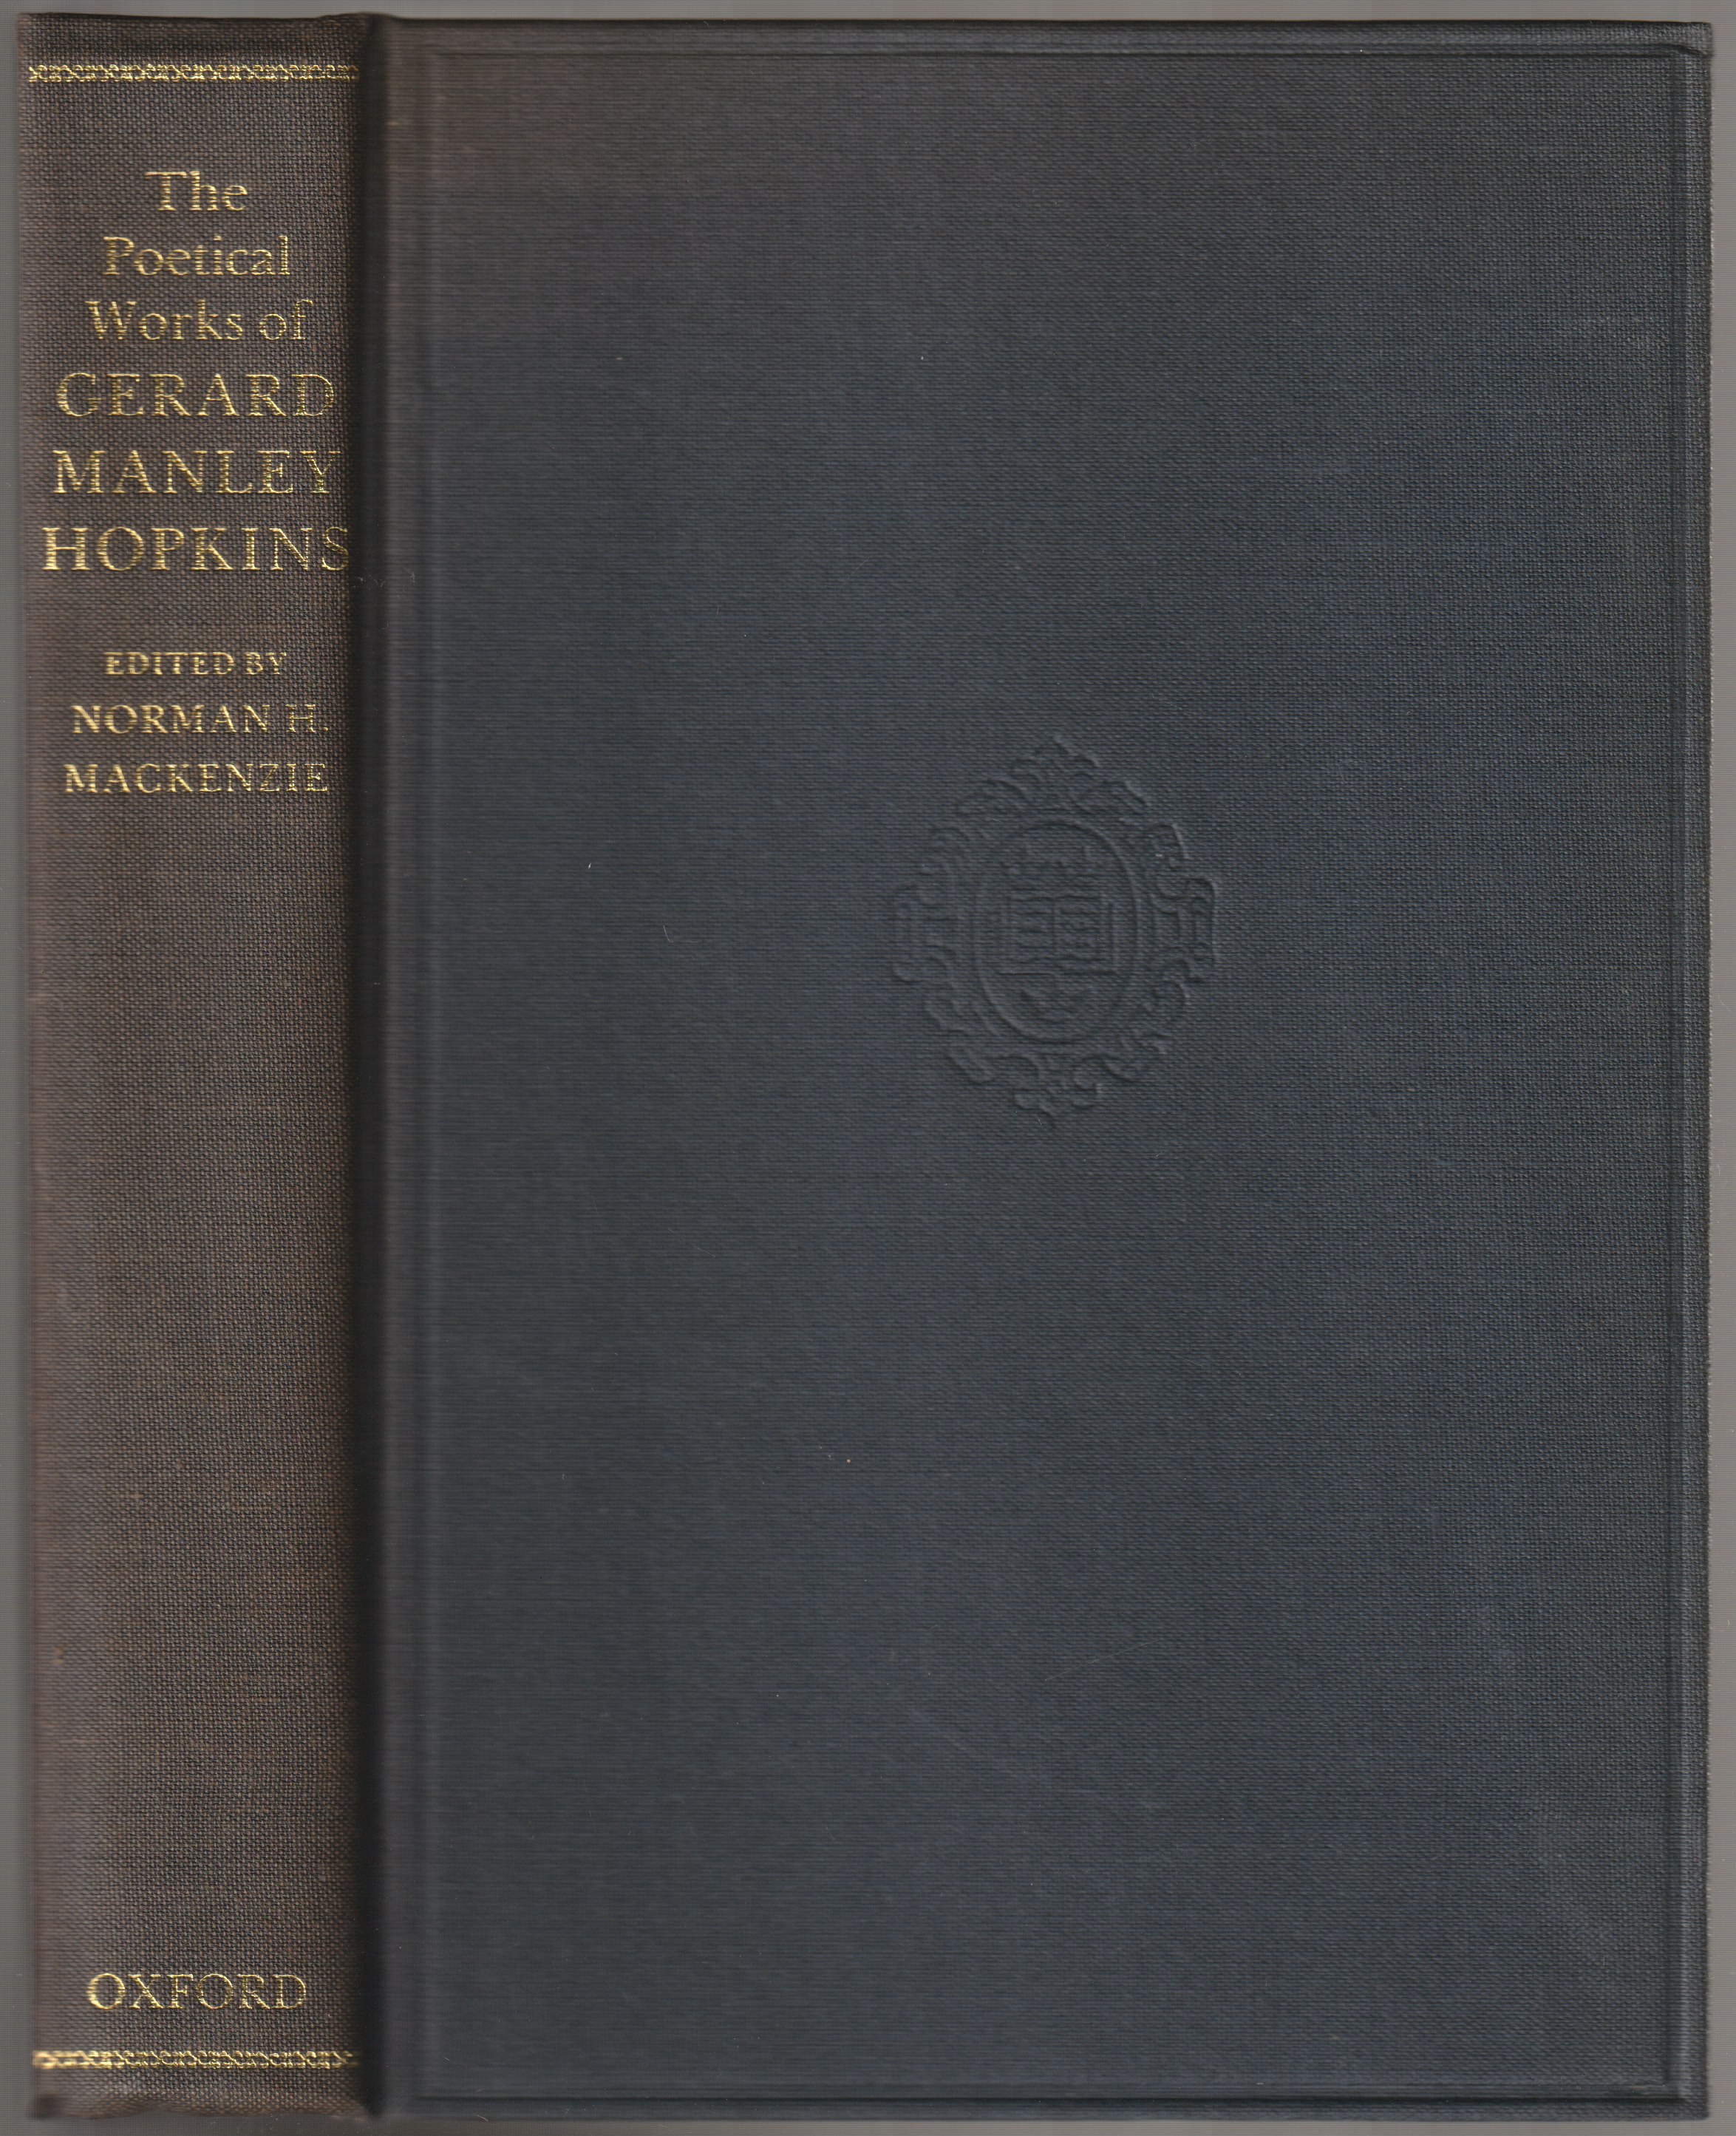 The poetical works of Gerard Manley Hopkins.